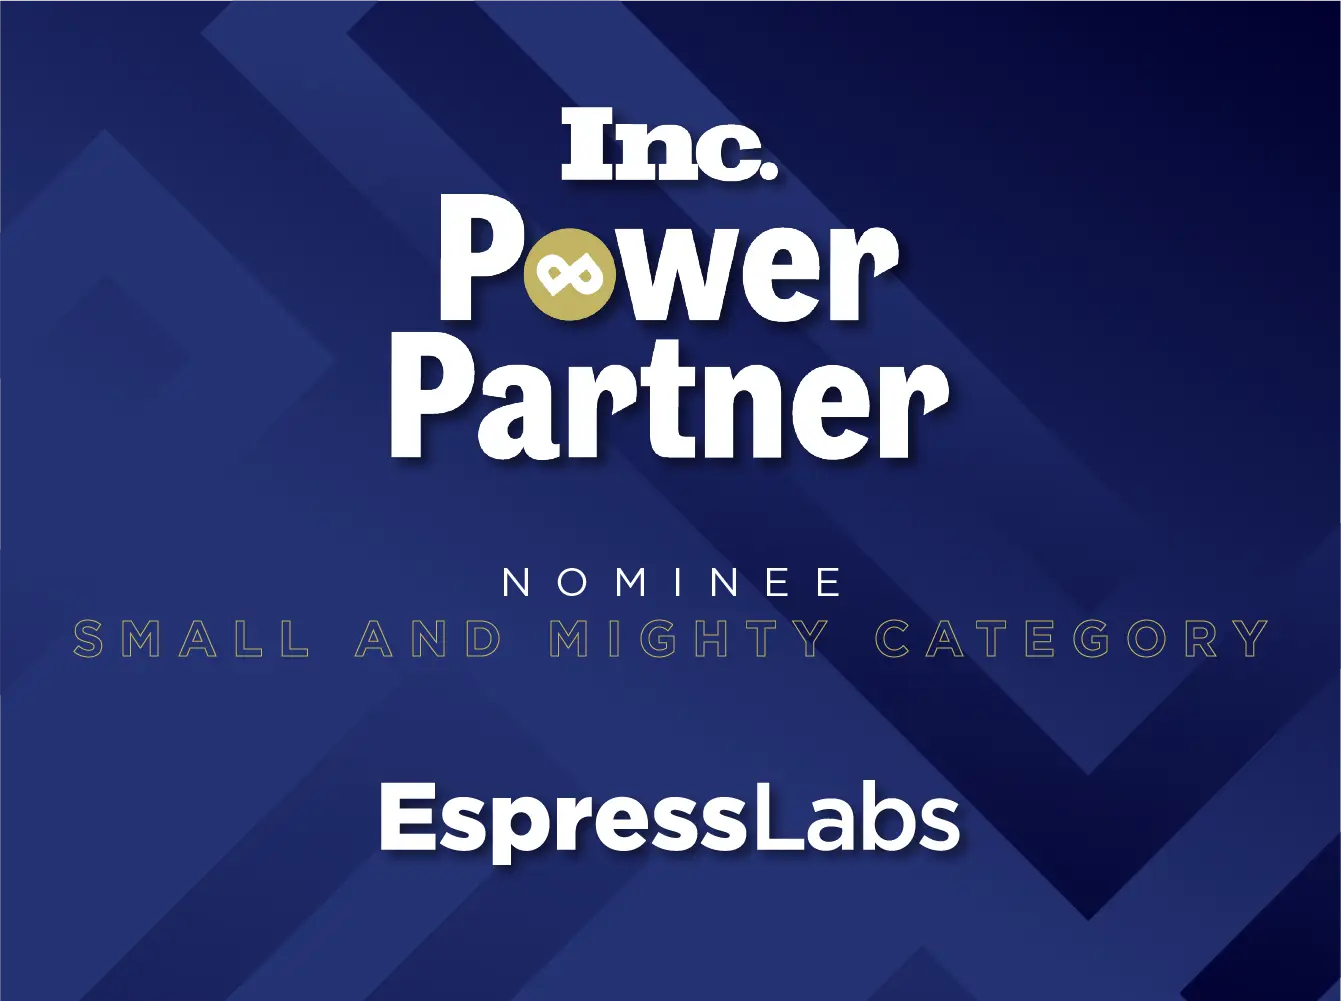 Espress Labs Nominated for Prestigious Inc Power Partner Award in the Small and Mighty Category - Thumbnail